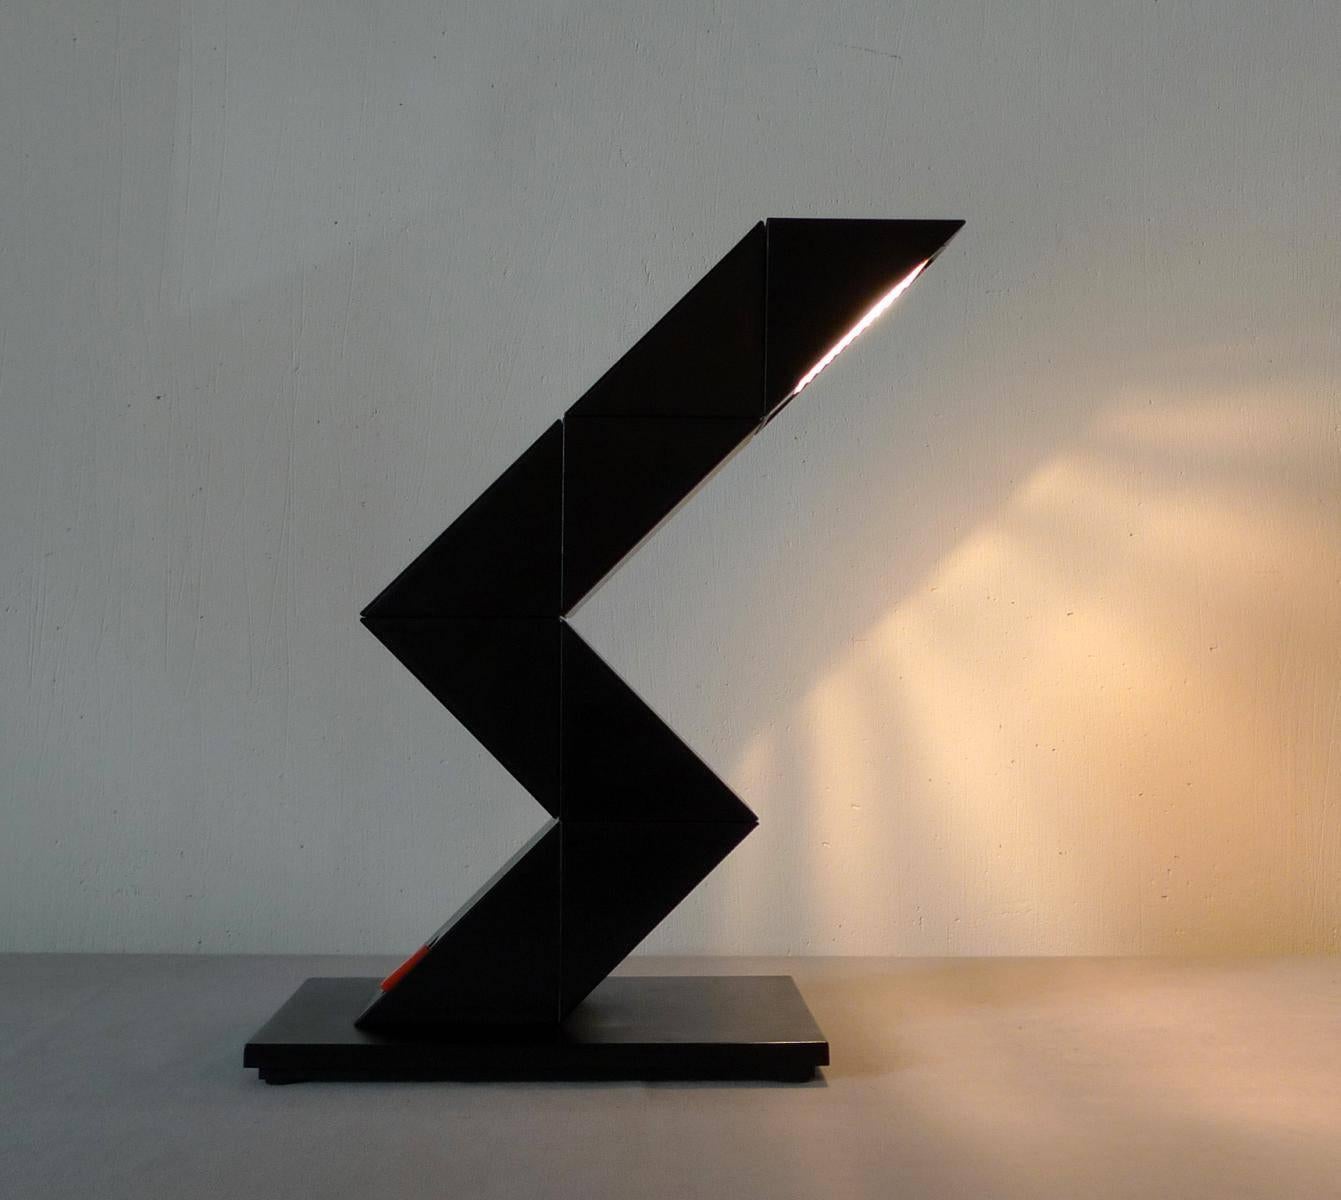 Nicely designed lamp by E-lite (Netherlands)
The lamp can twist and turn the light into different shapes. Kubist/Triangles, neat design. Matte black arm.

The lamp can be manipulated via turning the plastic blocks to an amazing number of